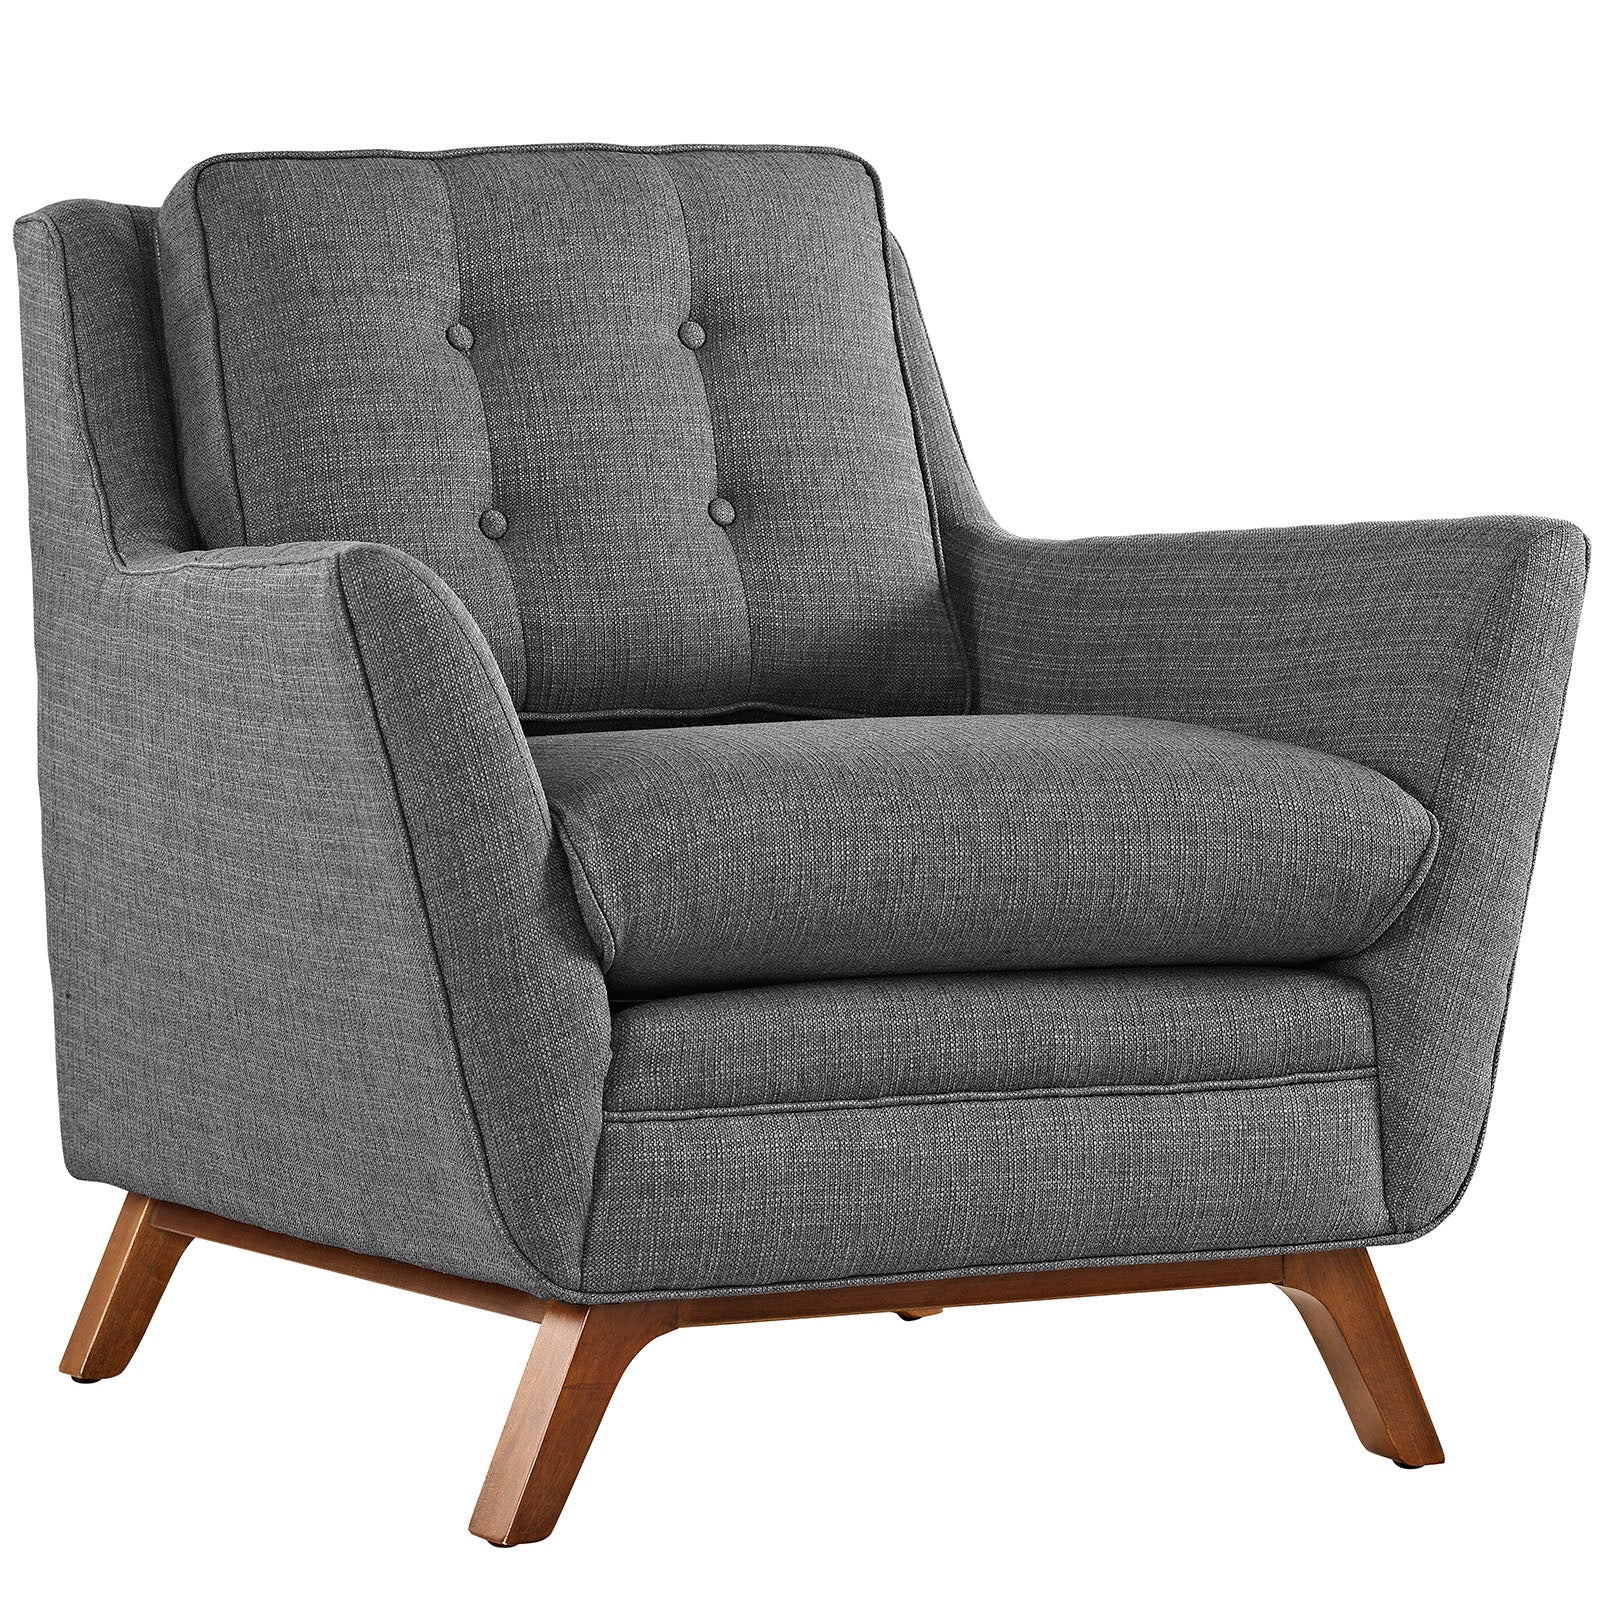 Modway Accent Chairs - Beguile Upholstered Fabric Armchair Gray